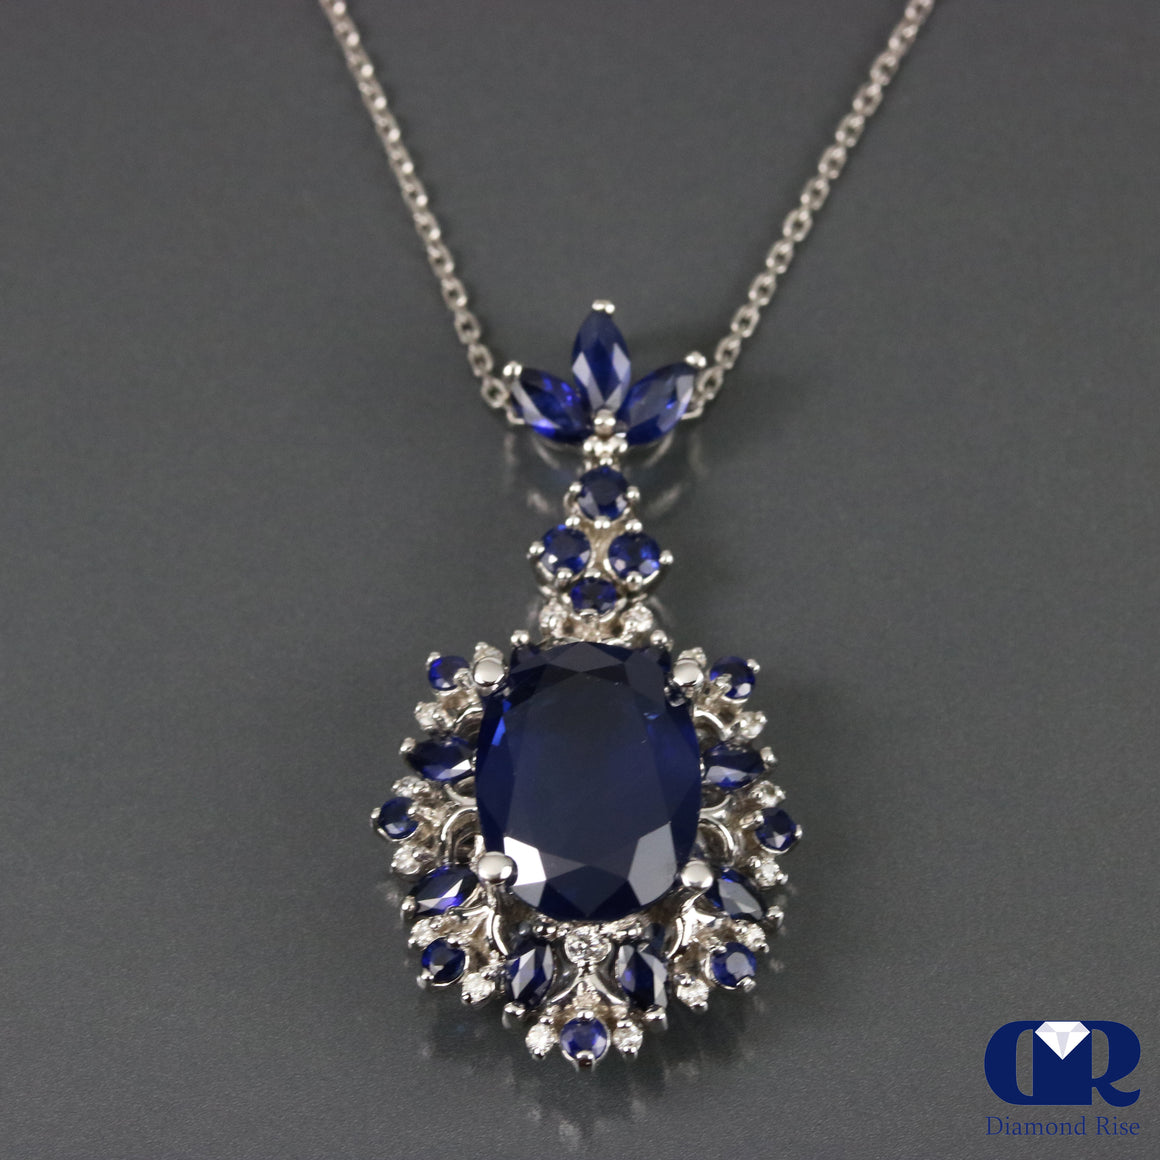 7.45 Ct Natural Oval Sapphire Pendant In 14K White Gold With 16" Chain - Diamond Rise Jewelry